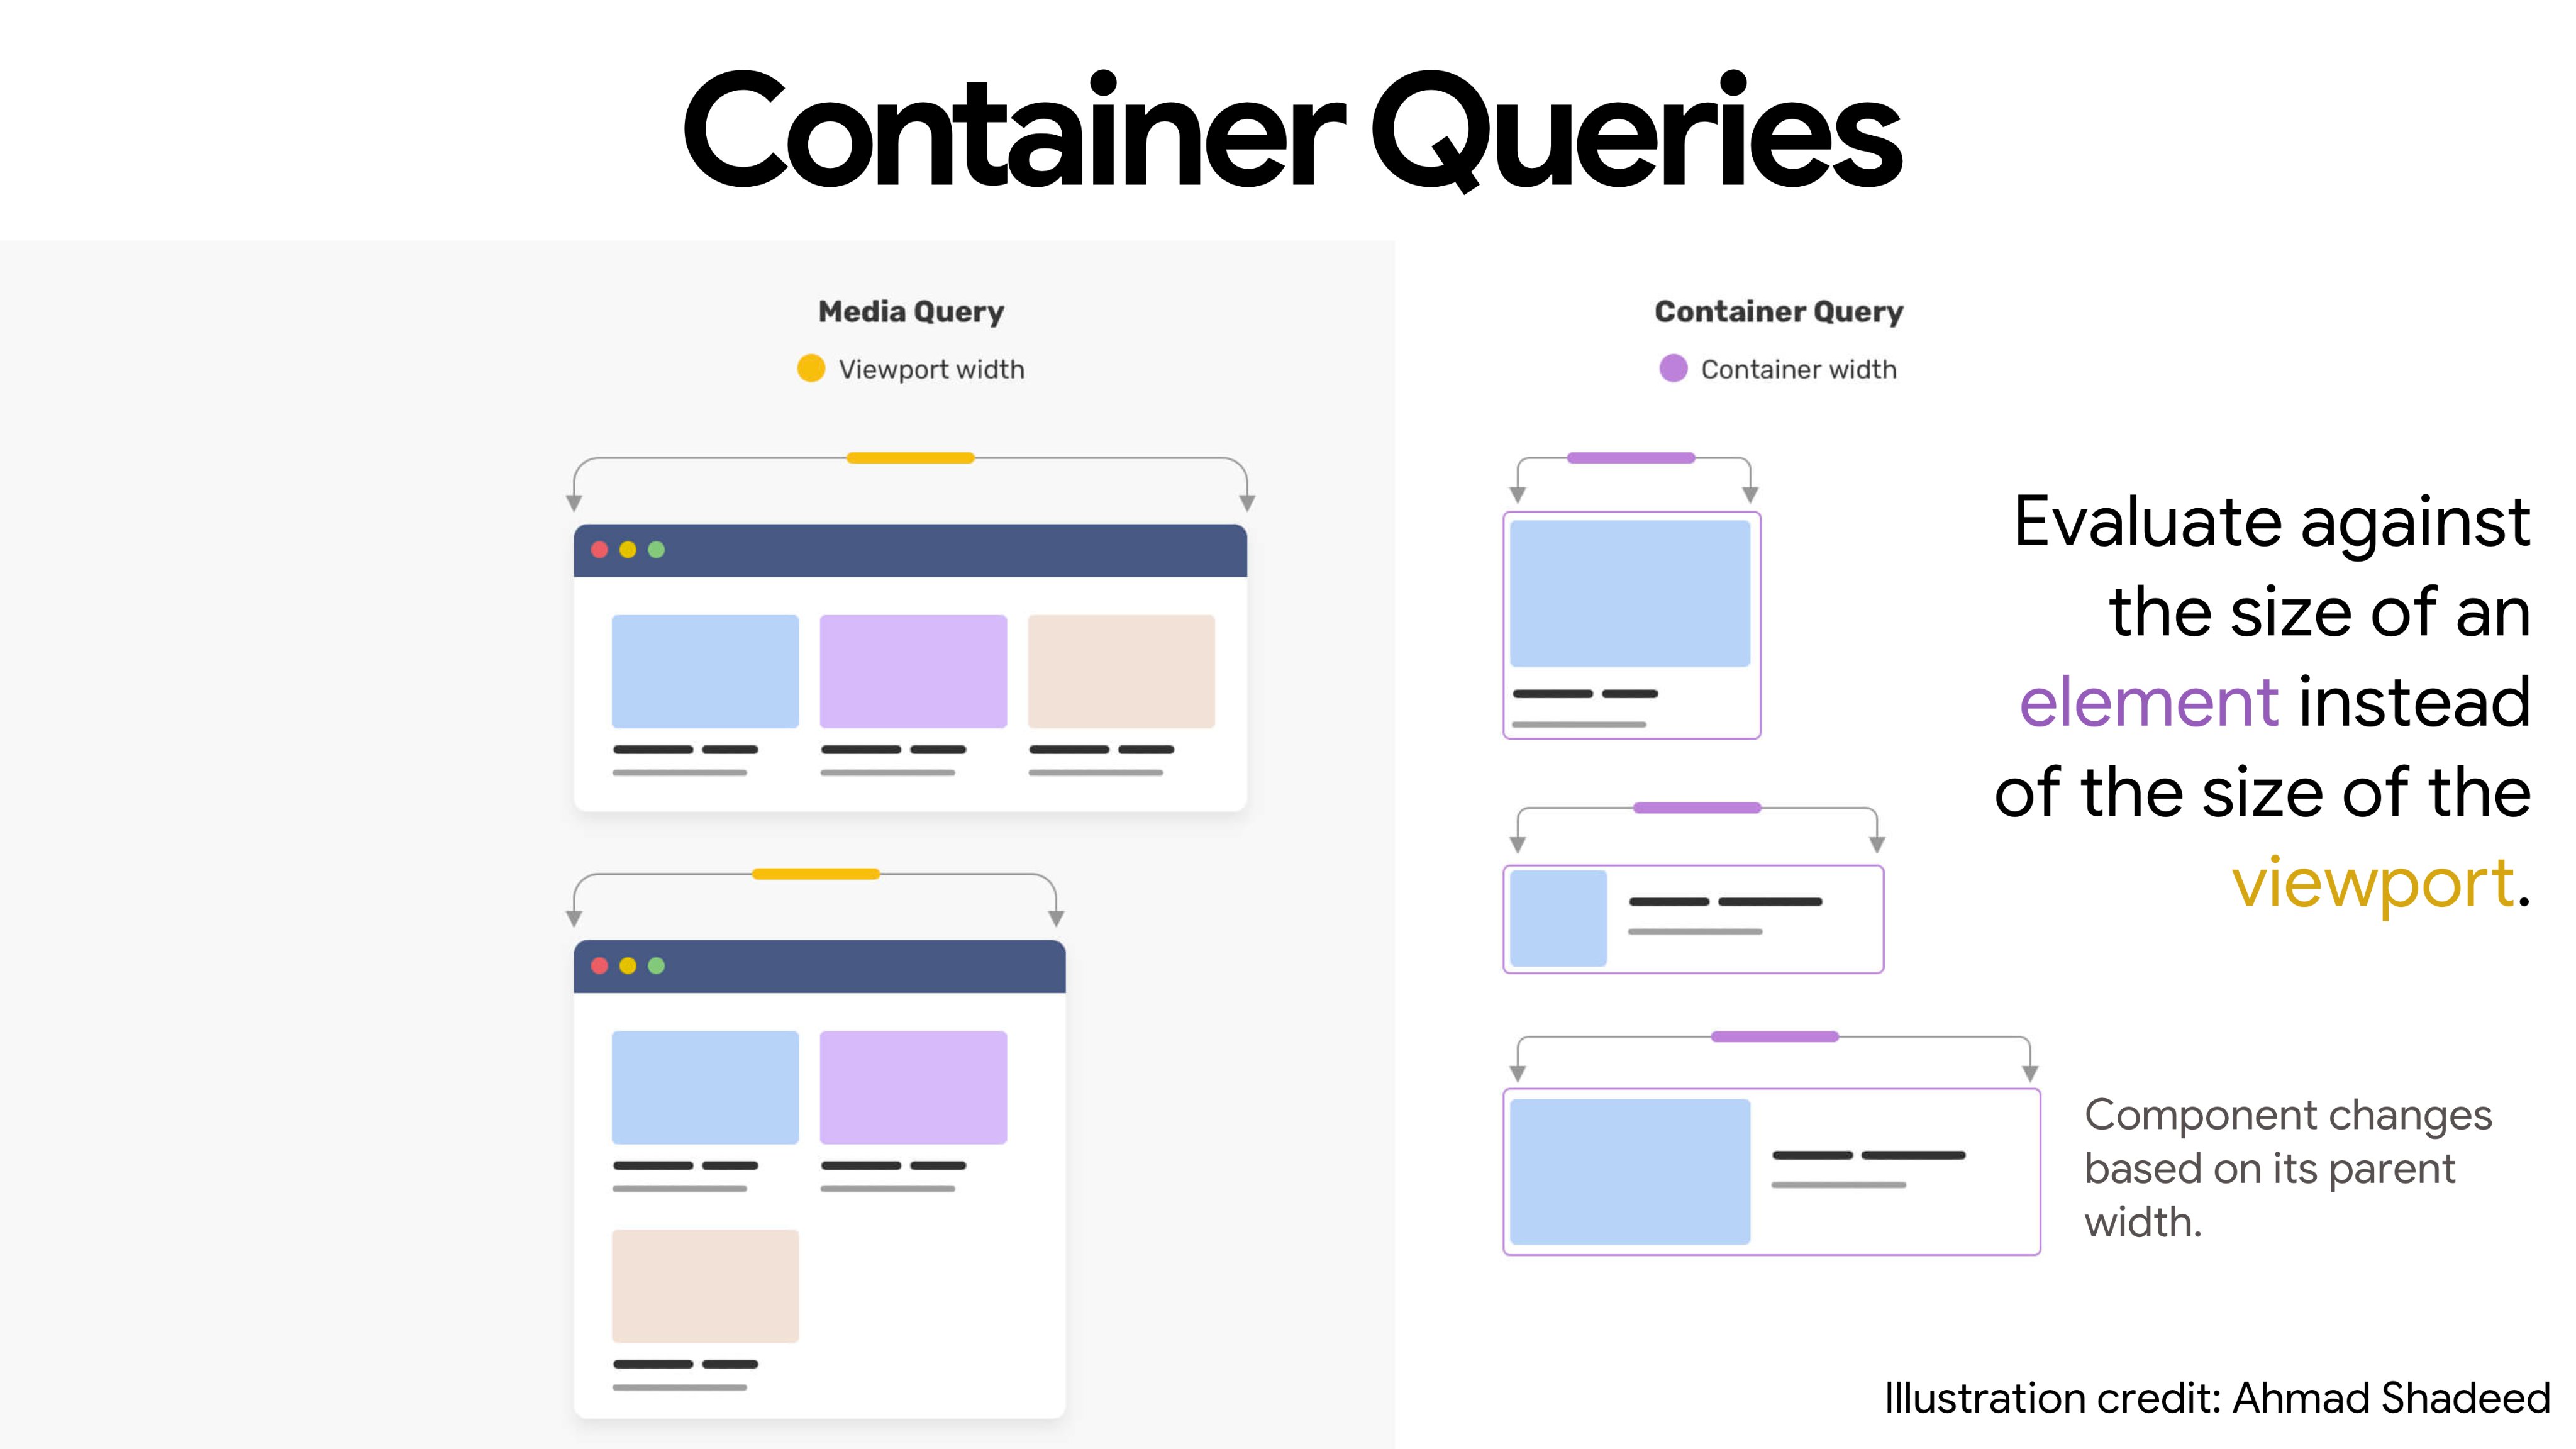 Illustration showing the difference of Media Queries in comparison to Container Queries. Credits: Ahmad Shadeed